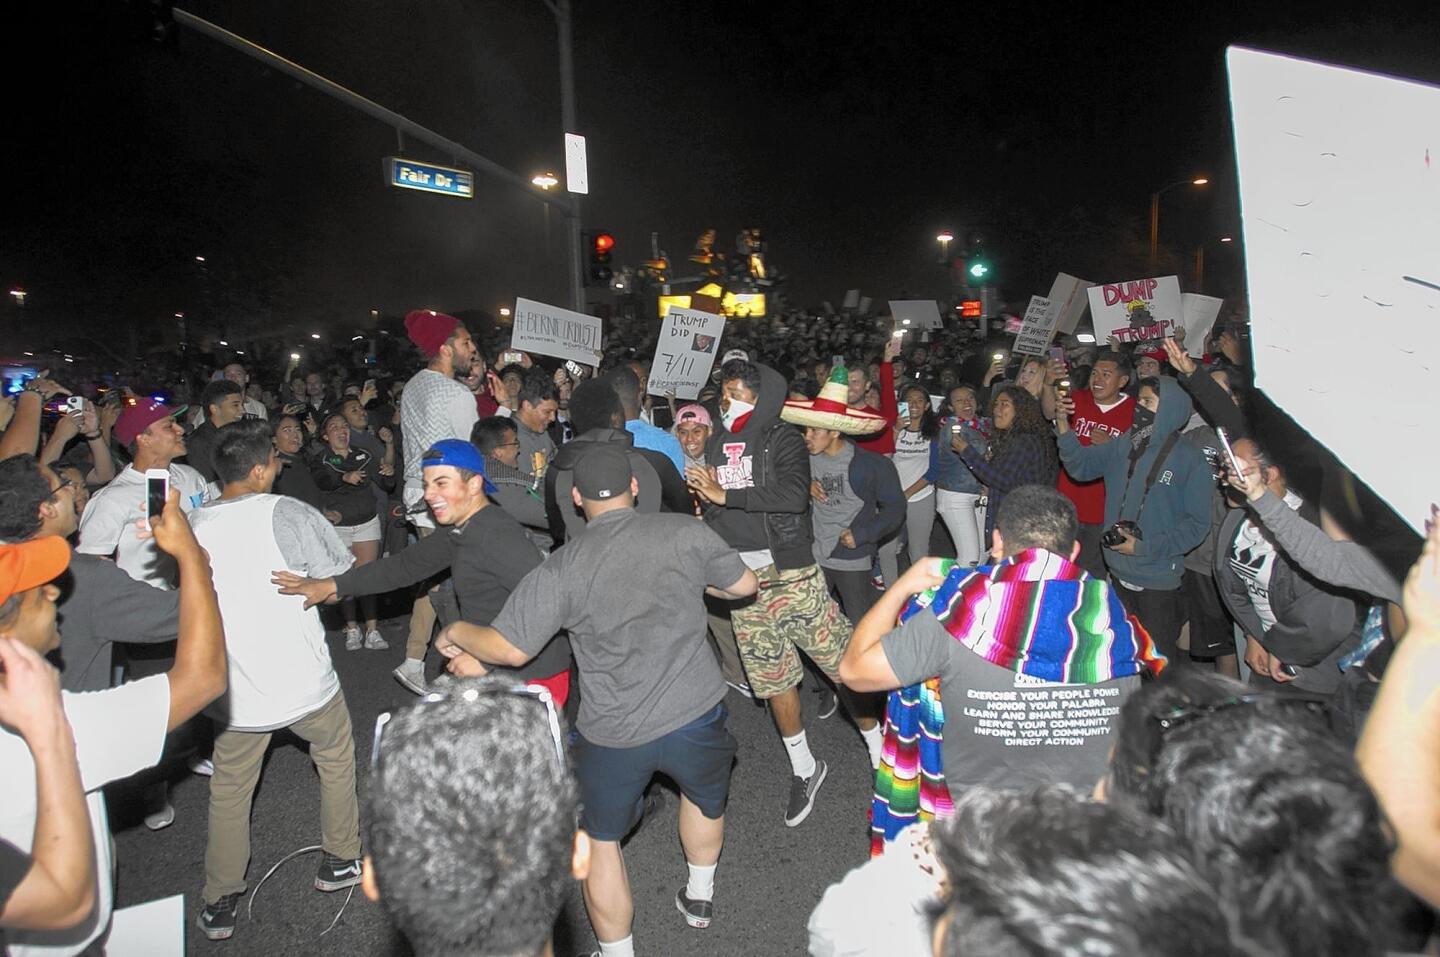 A crowd blocks the street at the corner of Fairview Road and Fair Drive in Costa Mesa on Thursday following a Donald Trump rally at the Orange County fairgrounds.